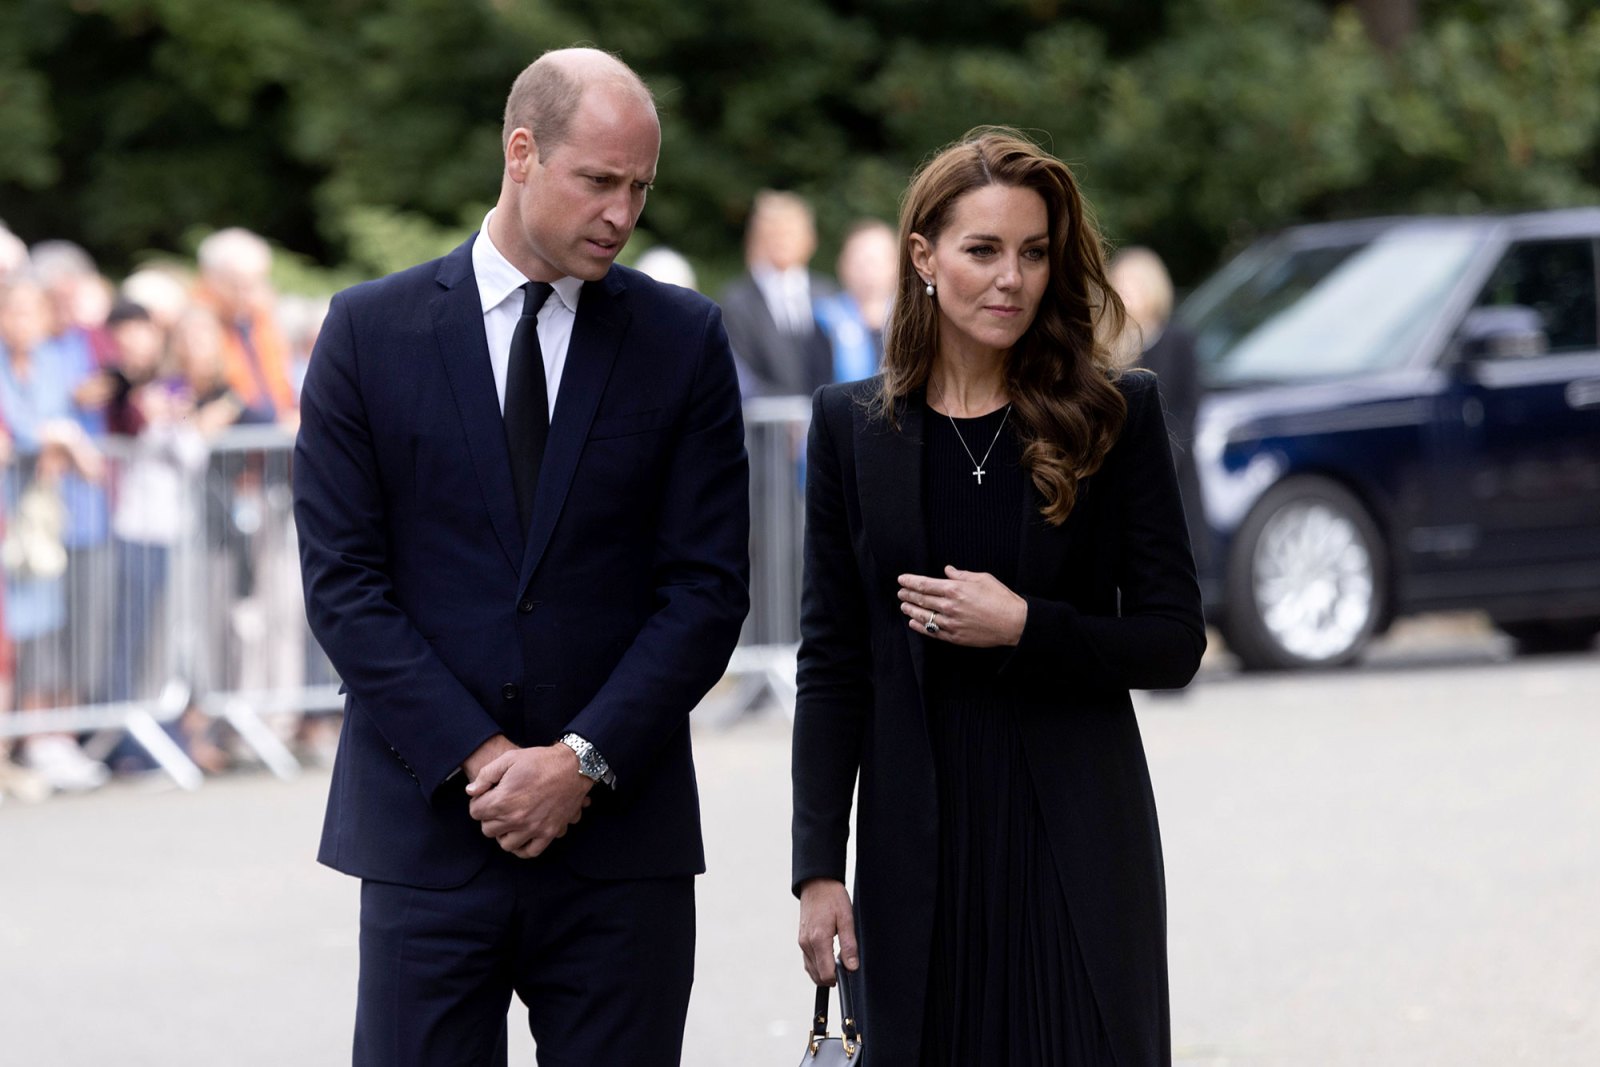 Prince William and Princess Kate View Floral Tributes to Queen Elizabeth II at Sandringham Estate 3